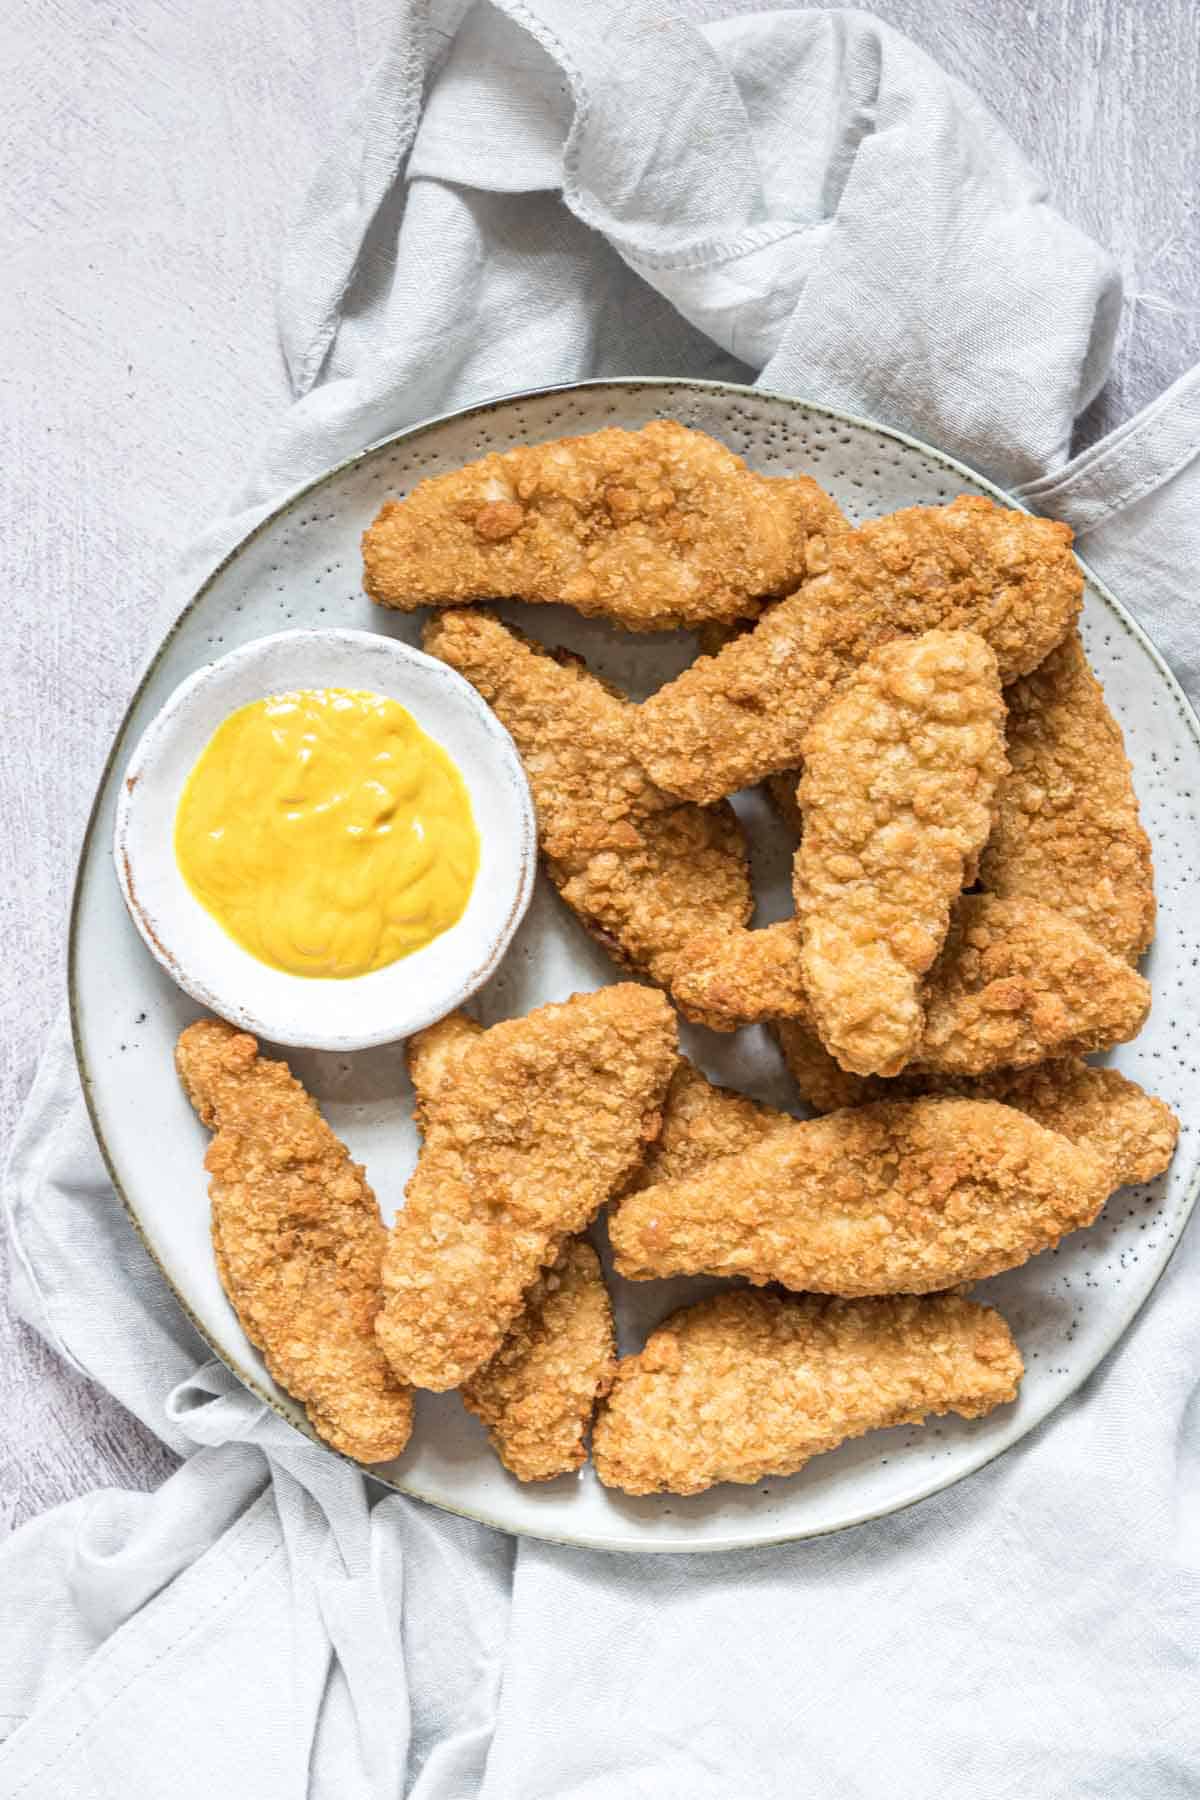 chicken tenders that have been reheated in air fryer and served on a plate with dipping sauce